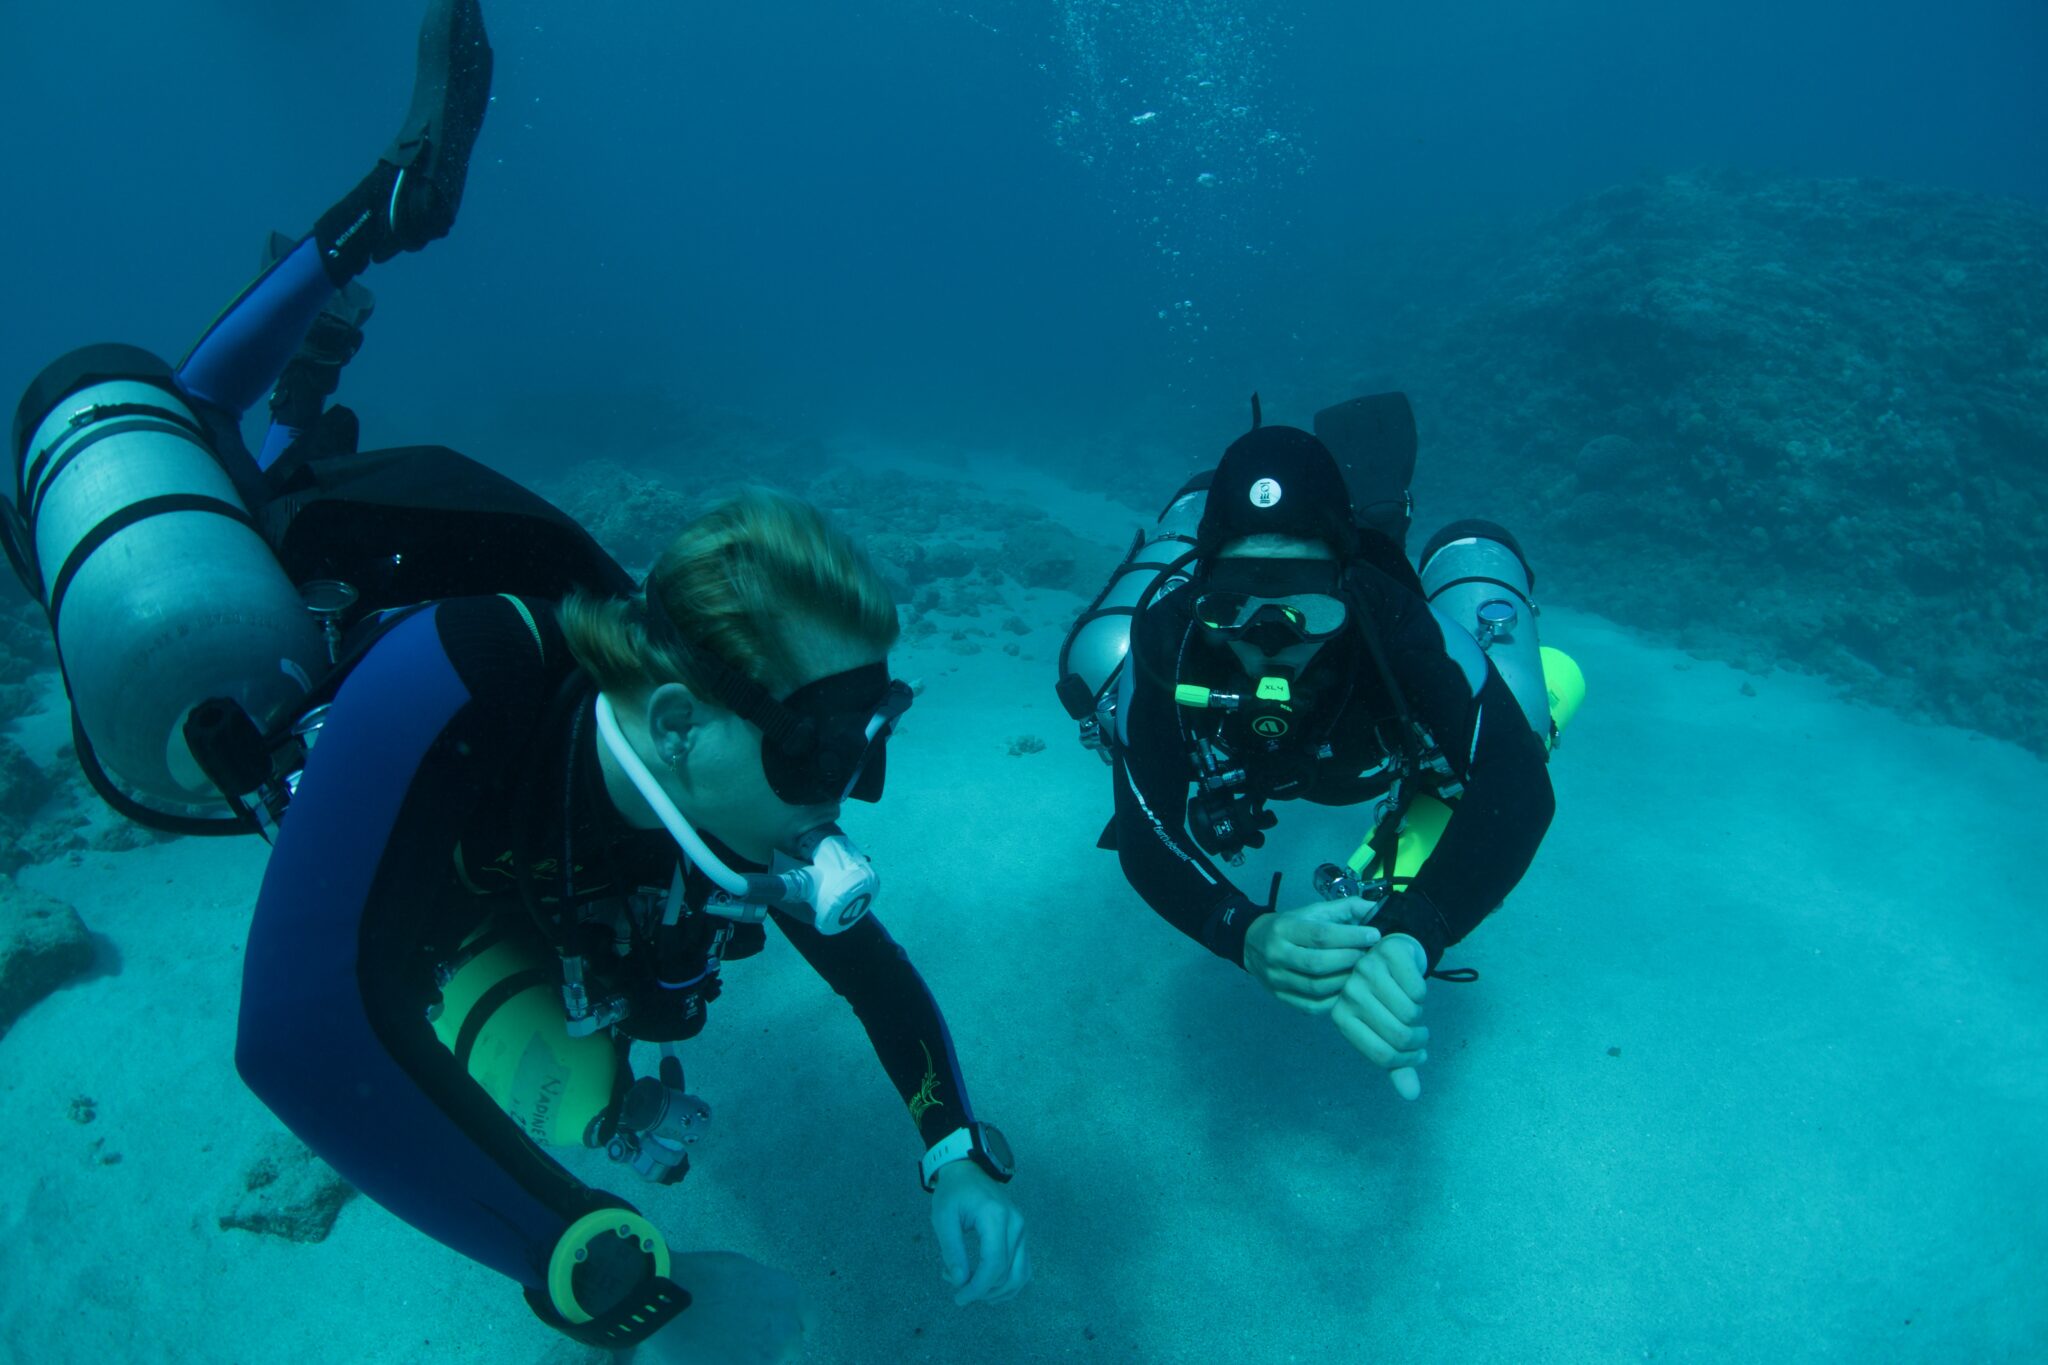 Emma Andrews and her buddy diving with sidemount configuration